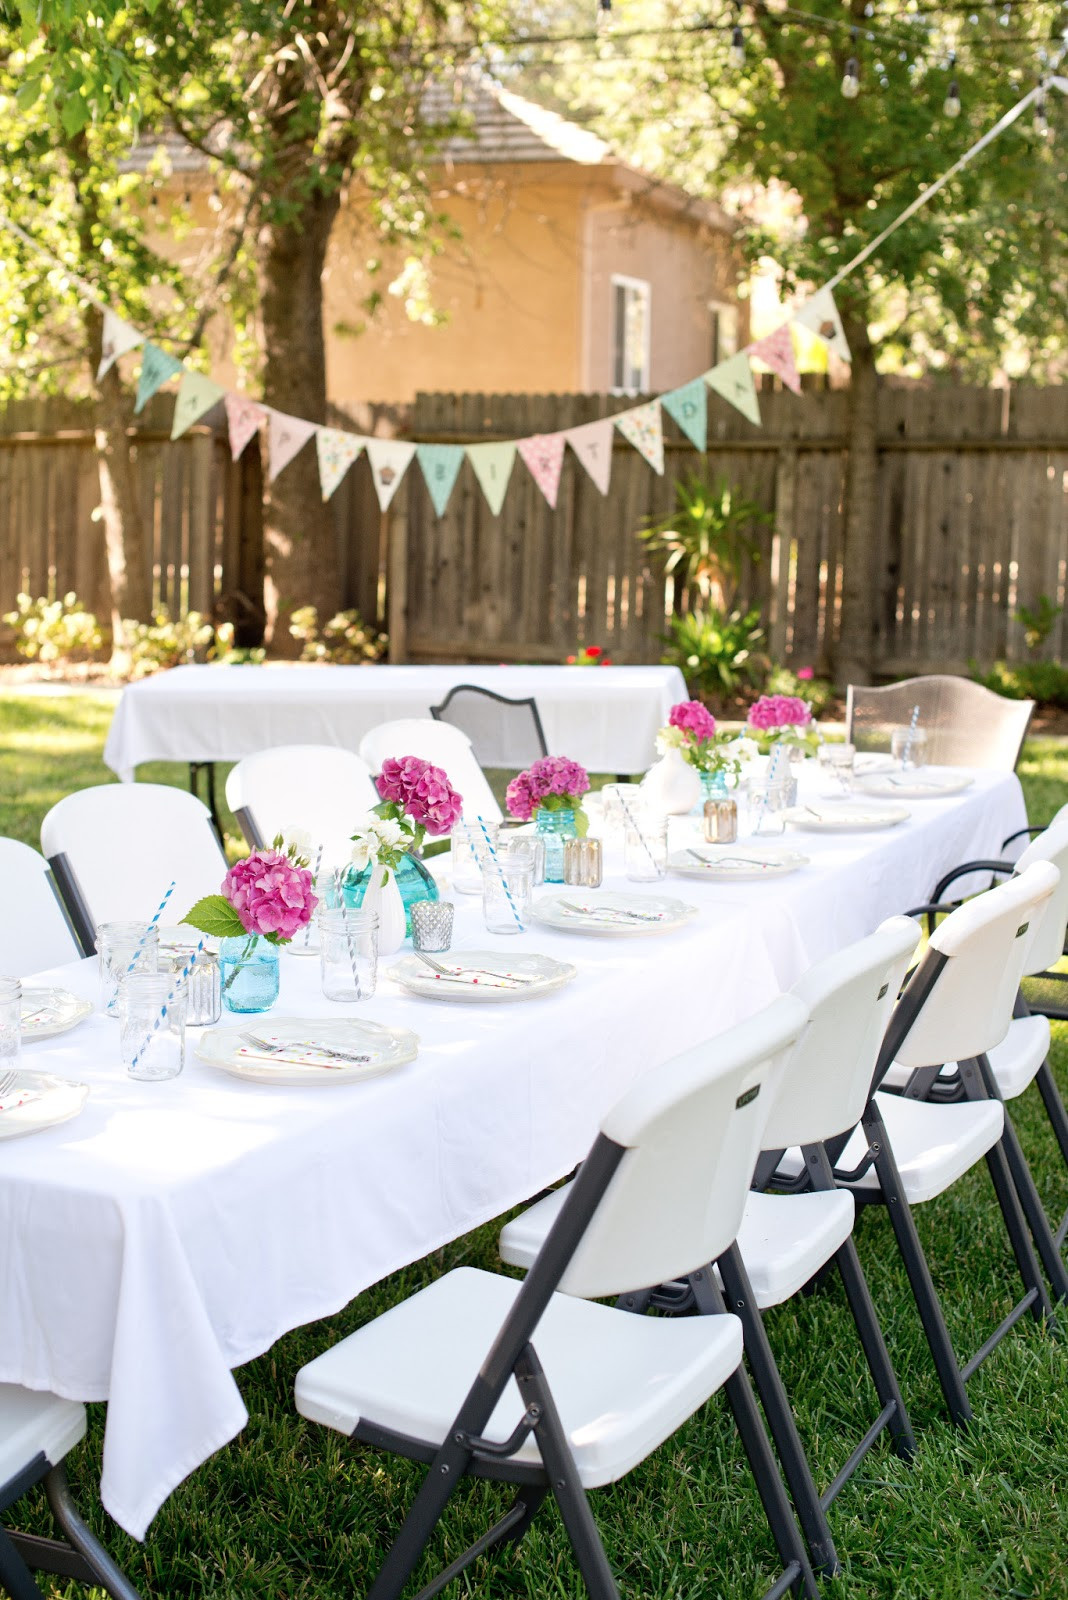 Garden Graduation Party Ideas
 Backyard Party Decorations For Unfor table Moments